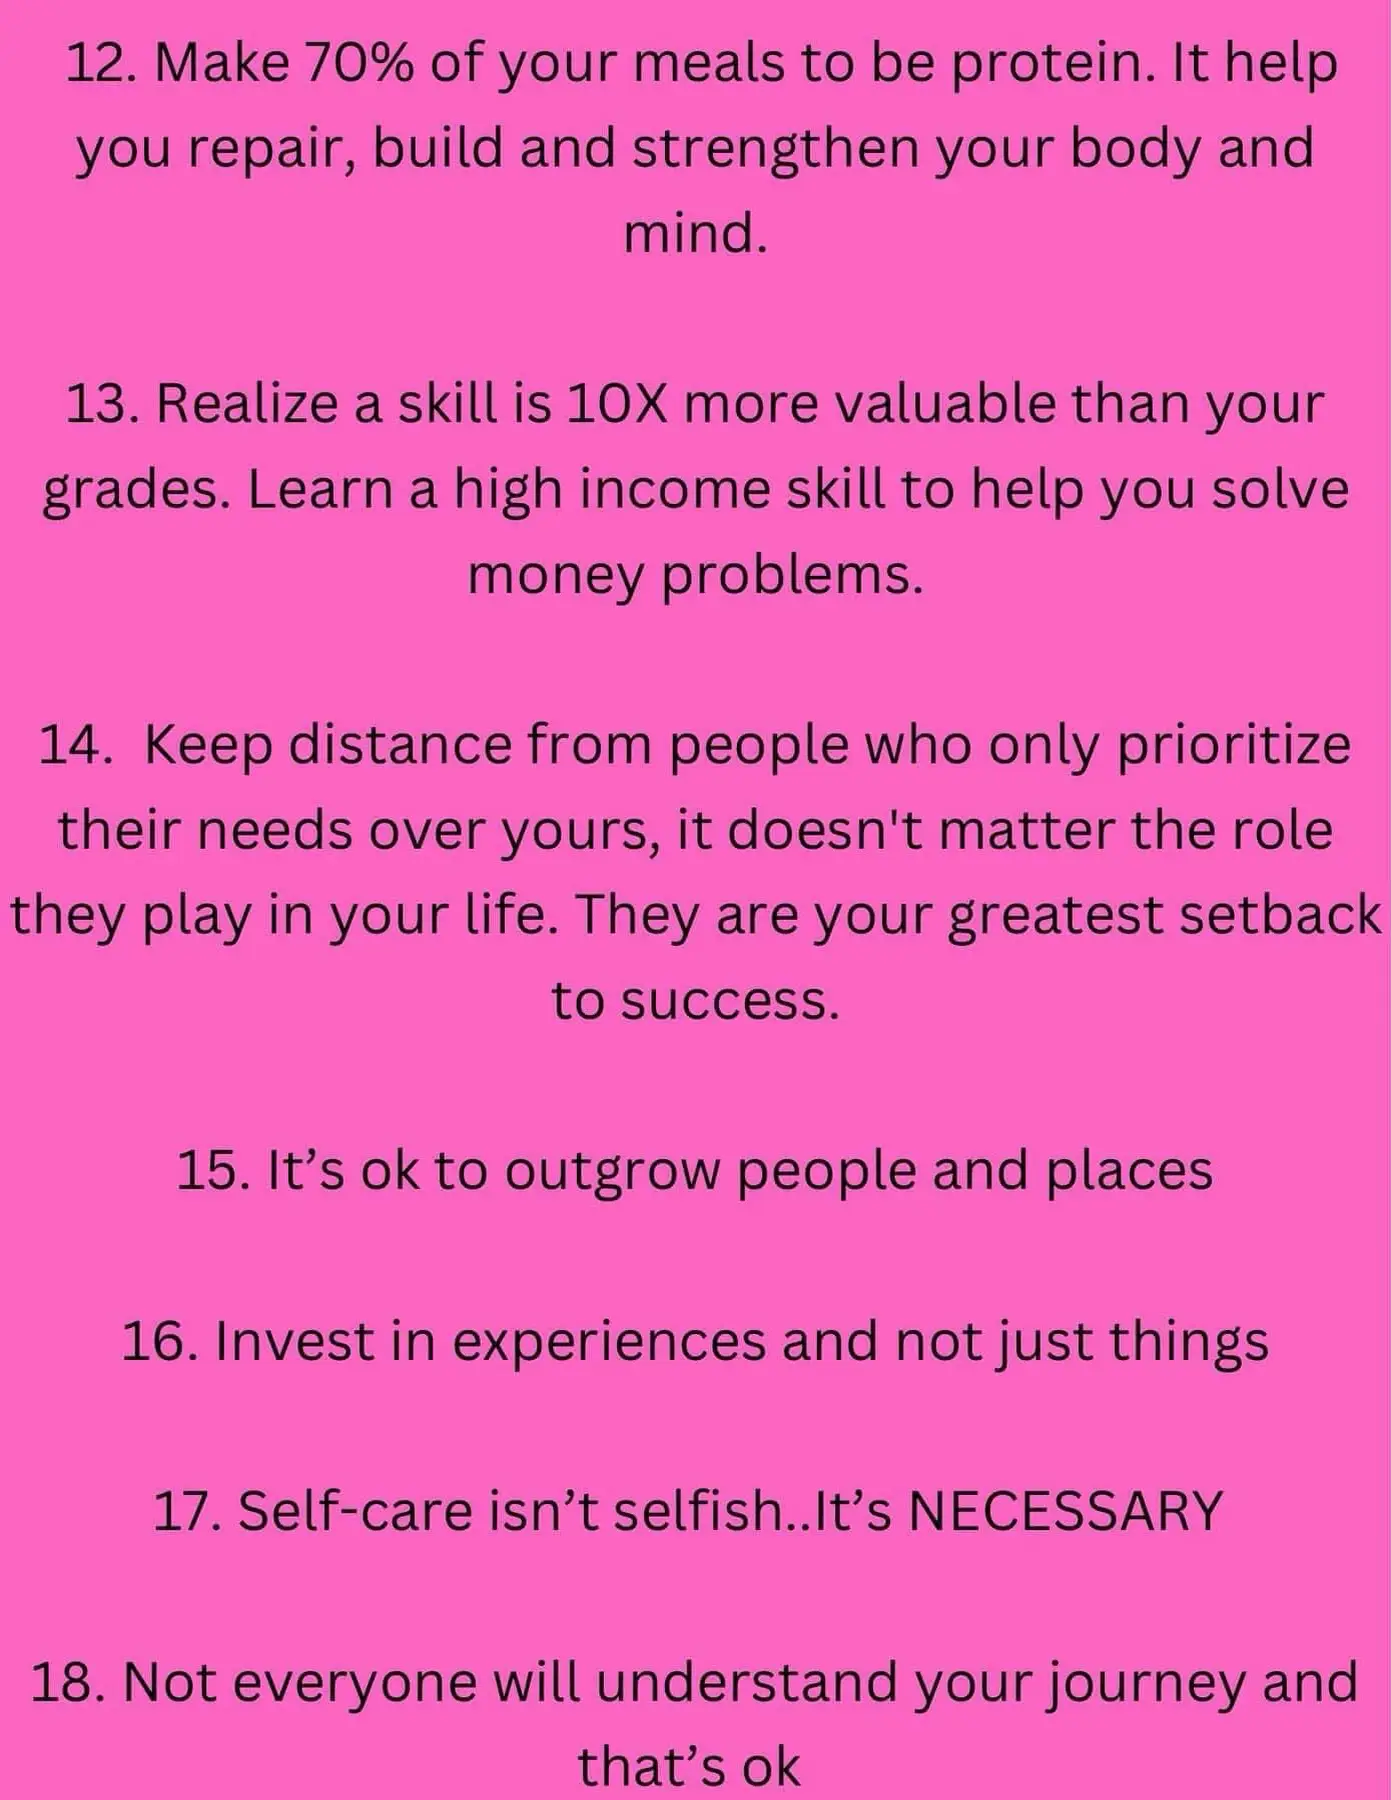  A list of 12 things to do before you outgrow people and places.